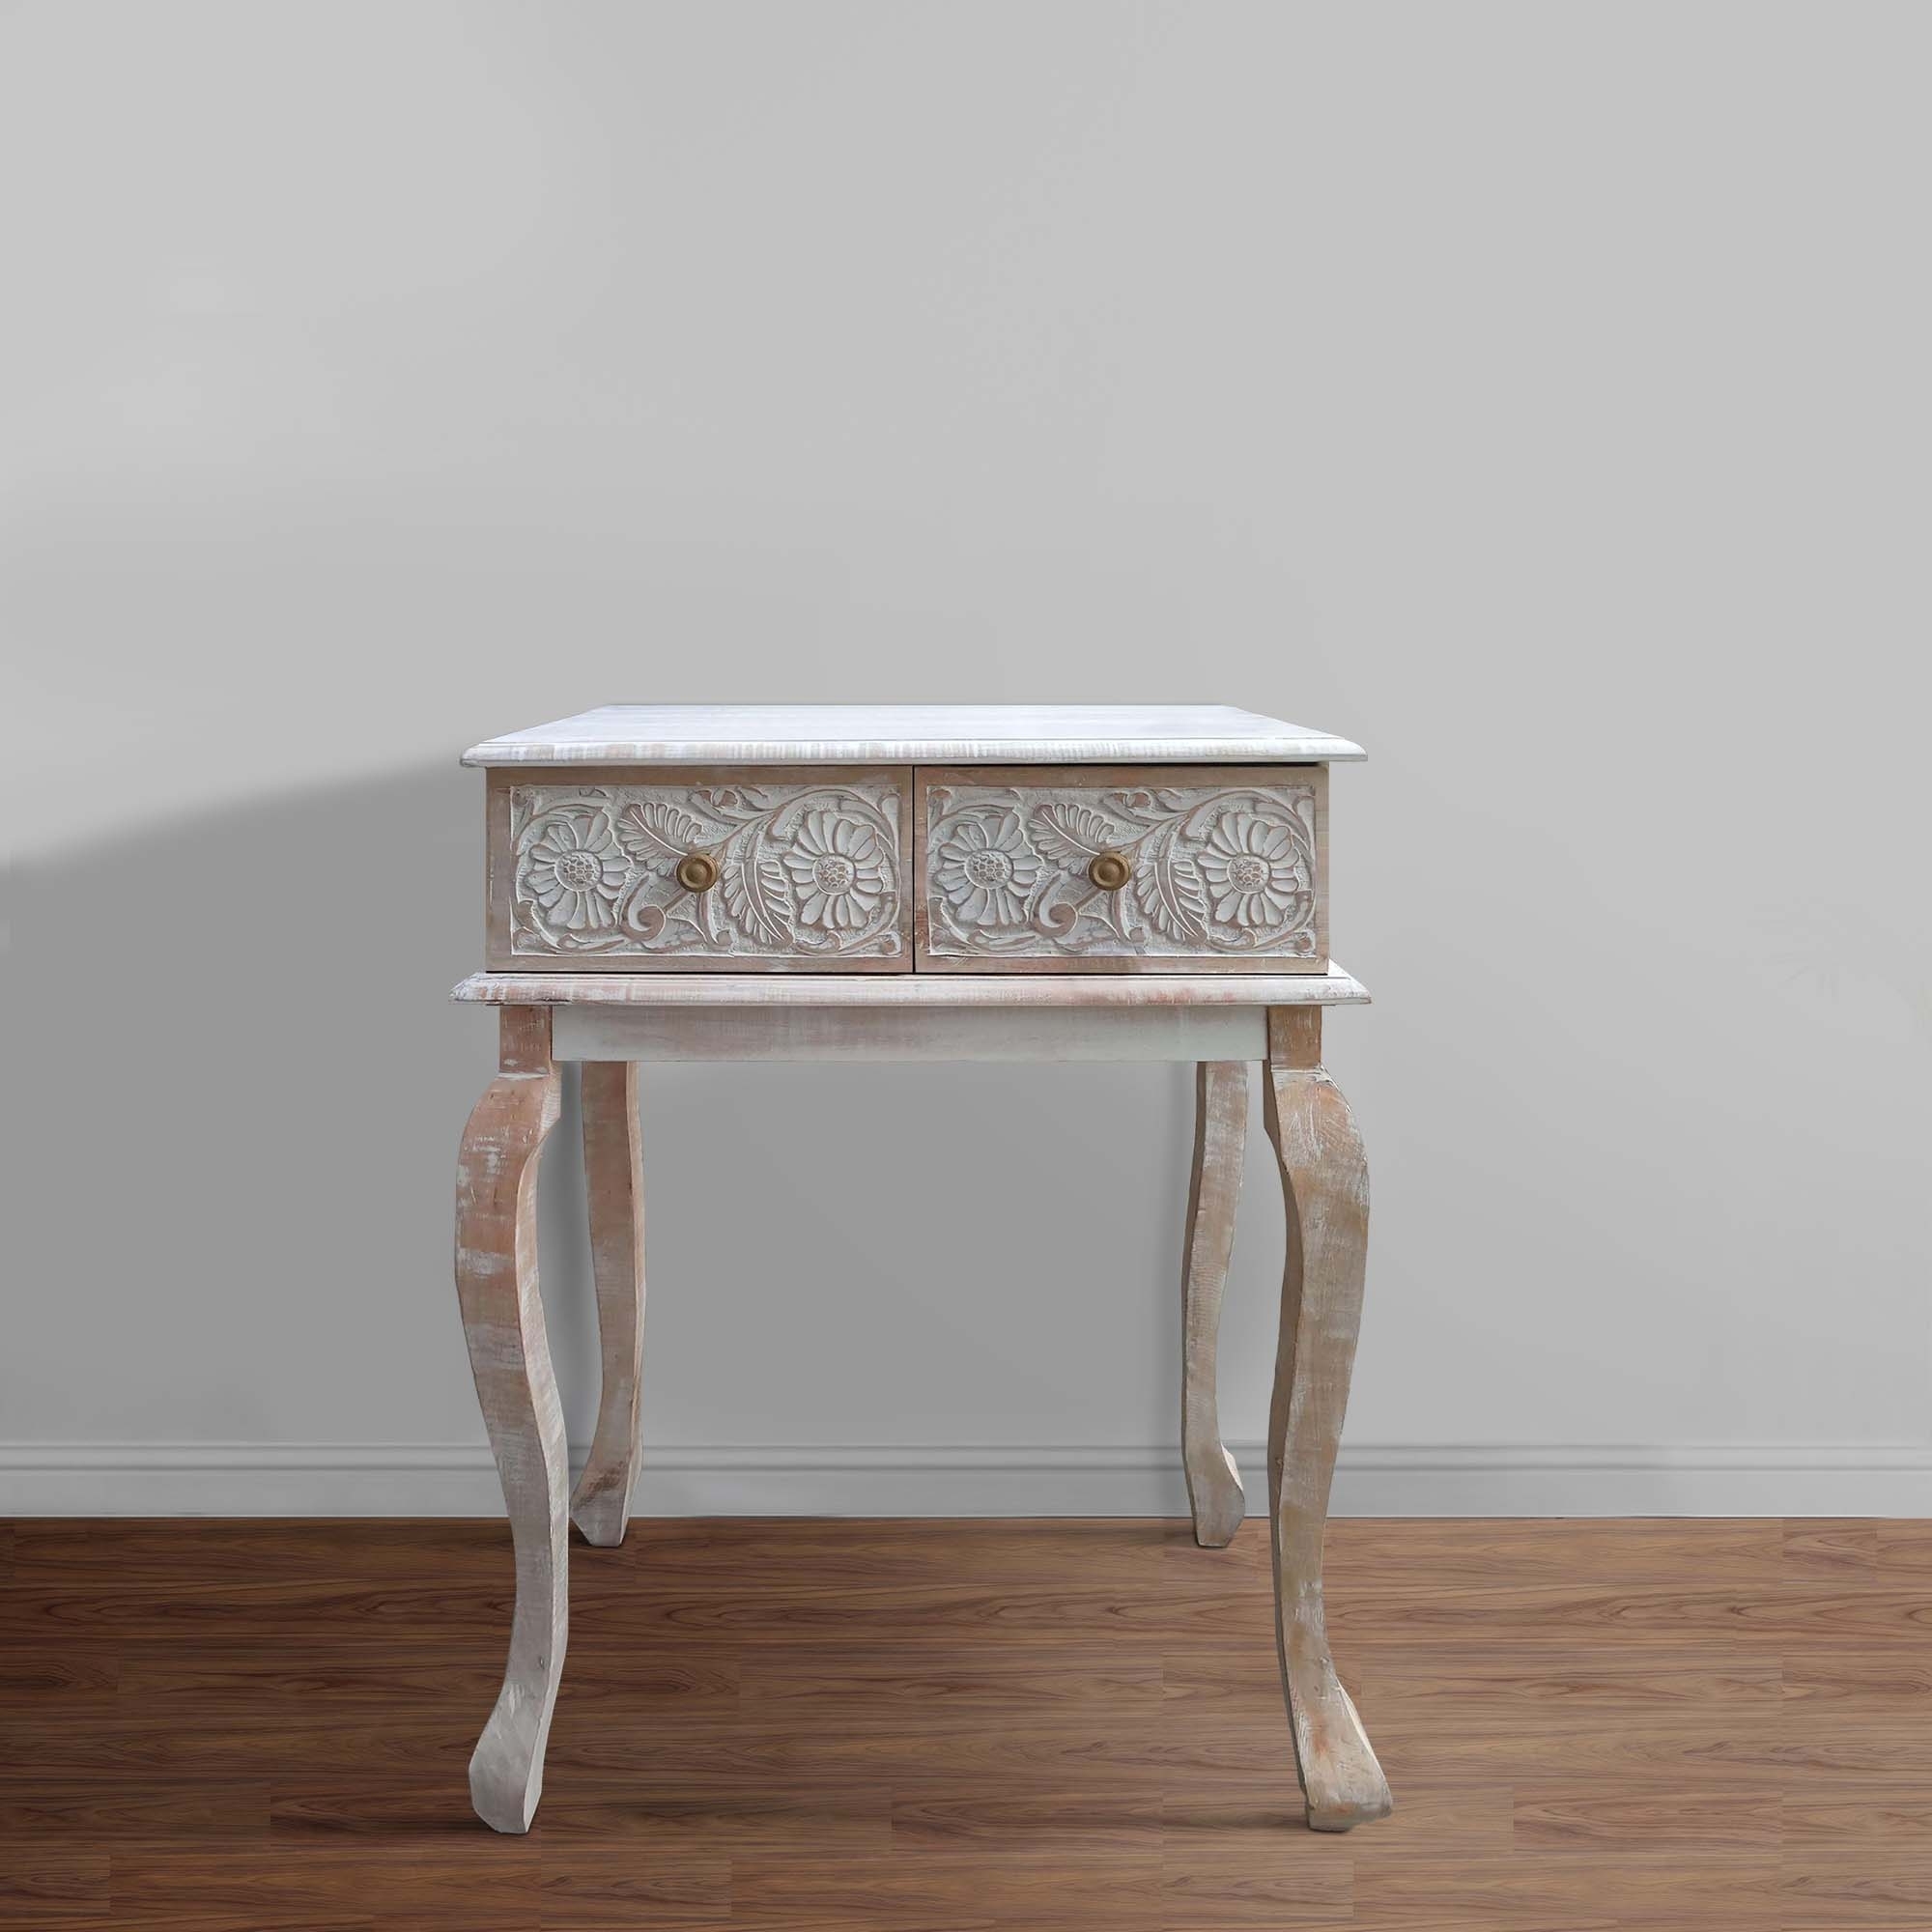 2 Drawer Mango Wood Console Table With Floral Carved Front, Brown And White- Saltoro Sherpi